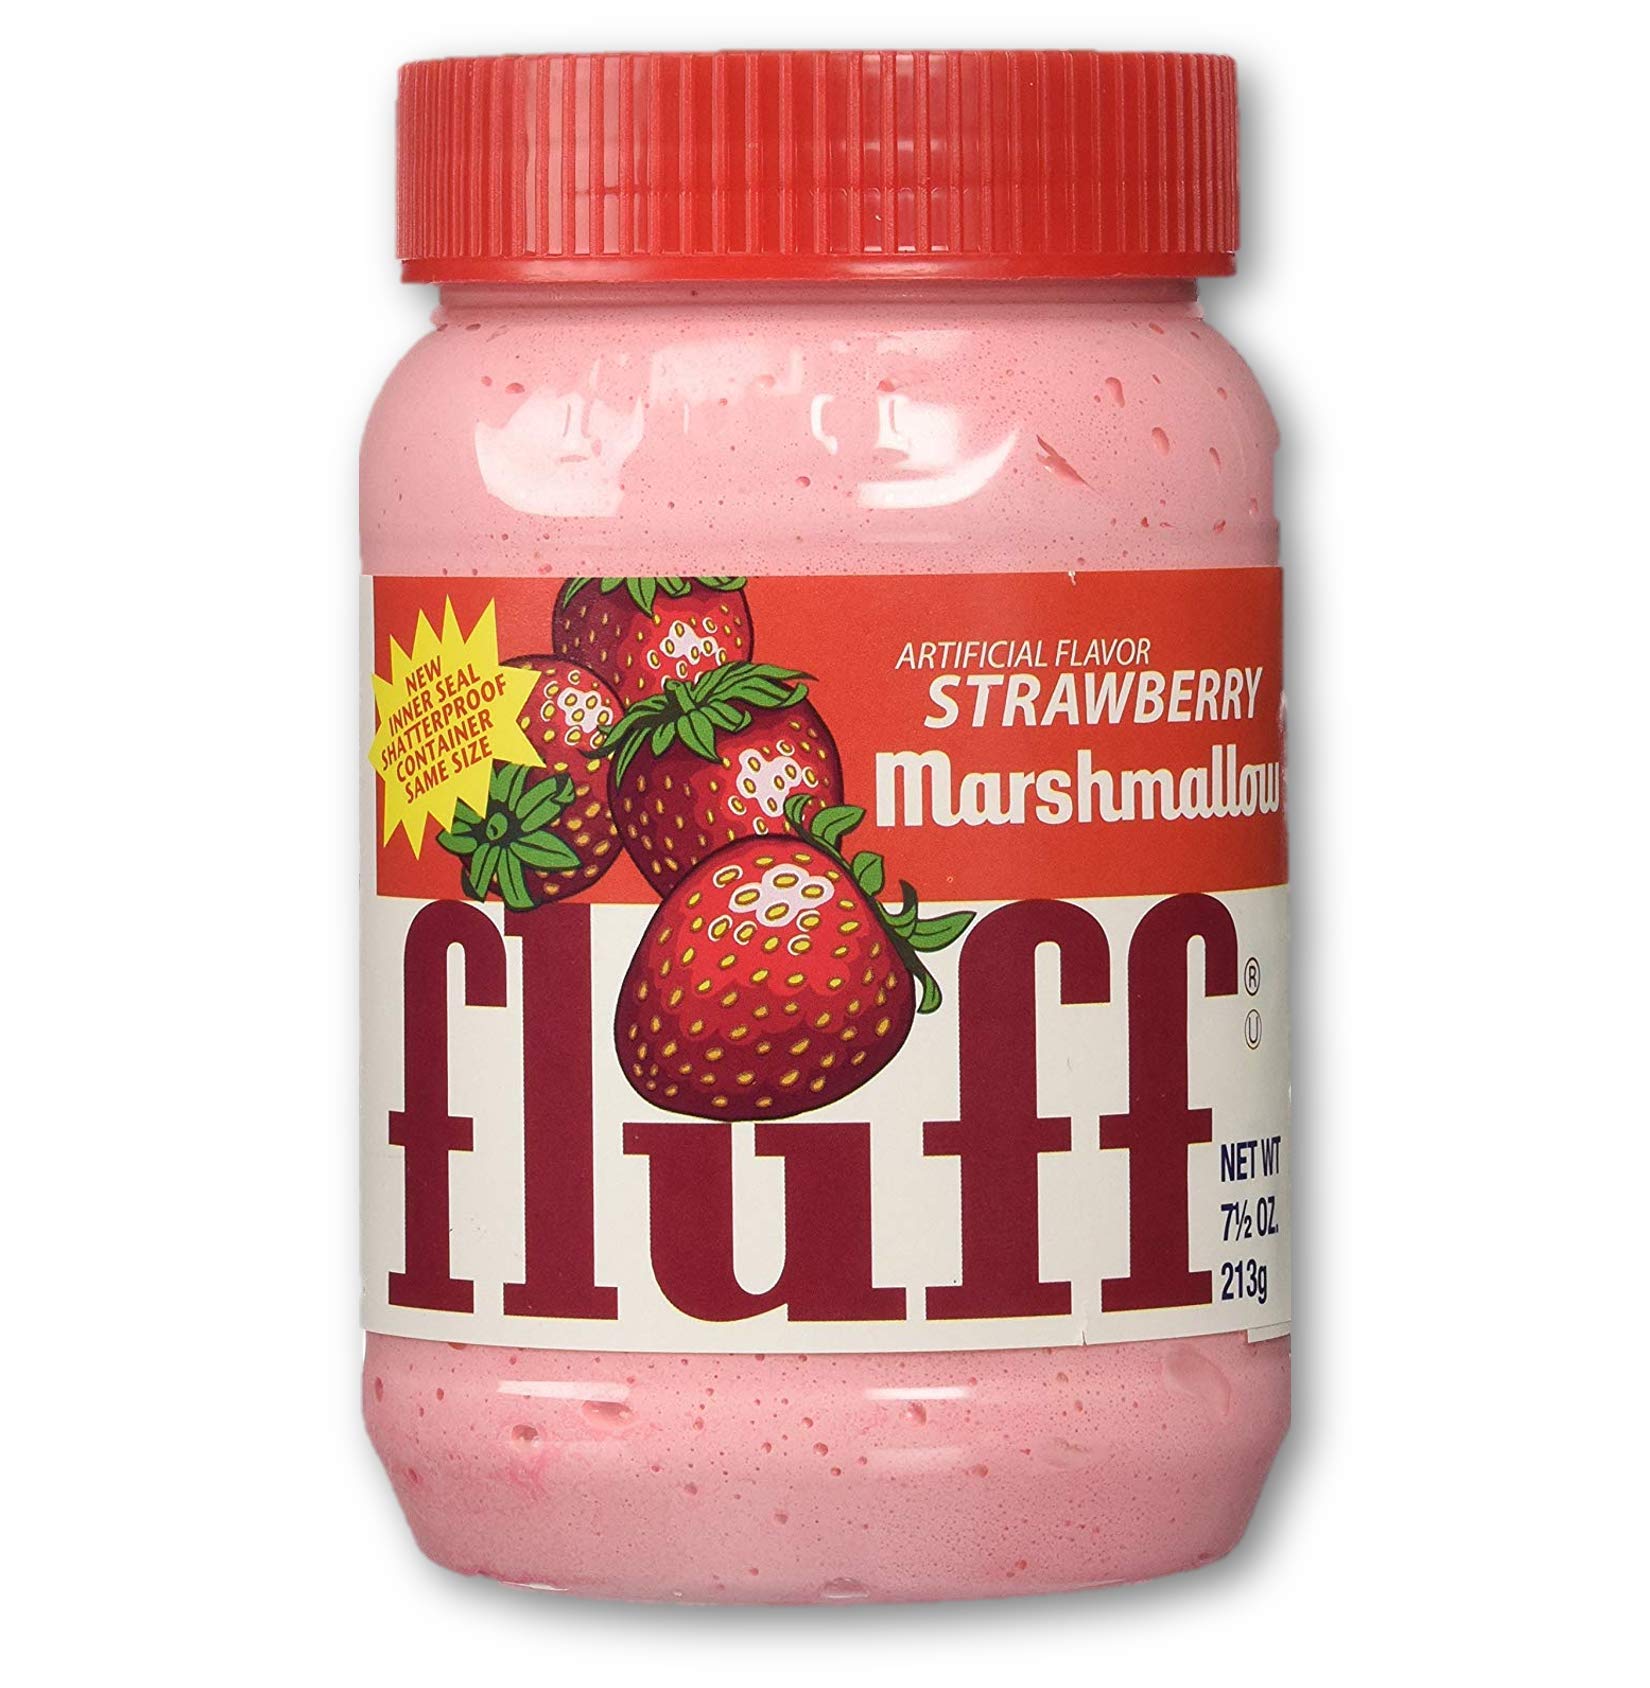 Tip: Marshmallow fluff only has 40 calories and 6g sugar/2tbsp (much less  than most jellies) is made with only 4 ingredients, and taste much better  imo. 2tbsp pb, 2tbsp fluff, 2 rice